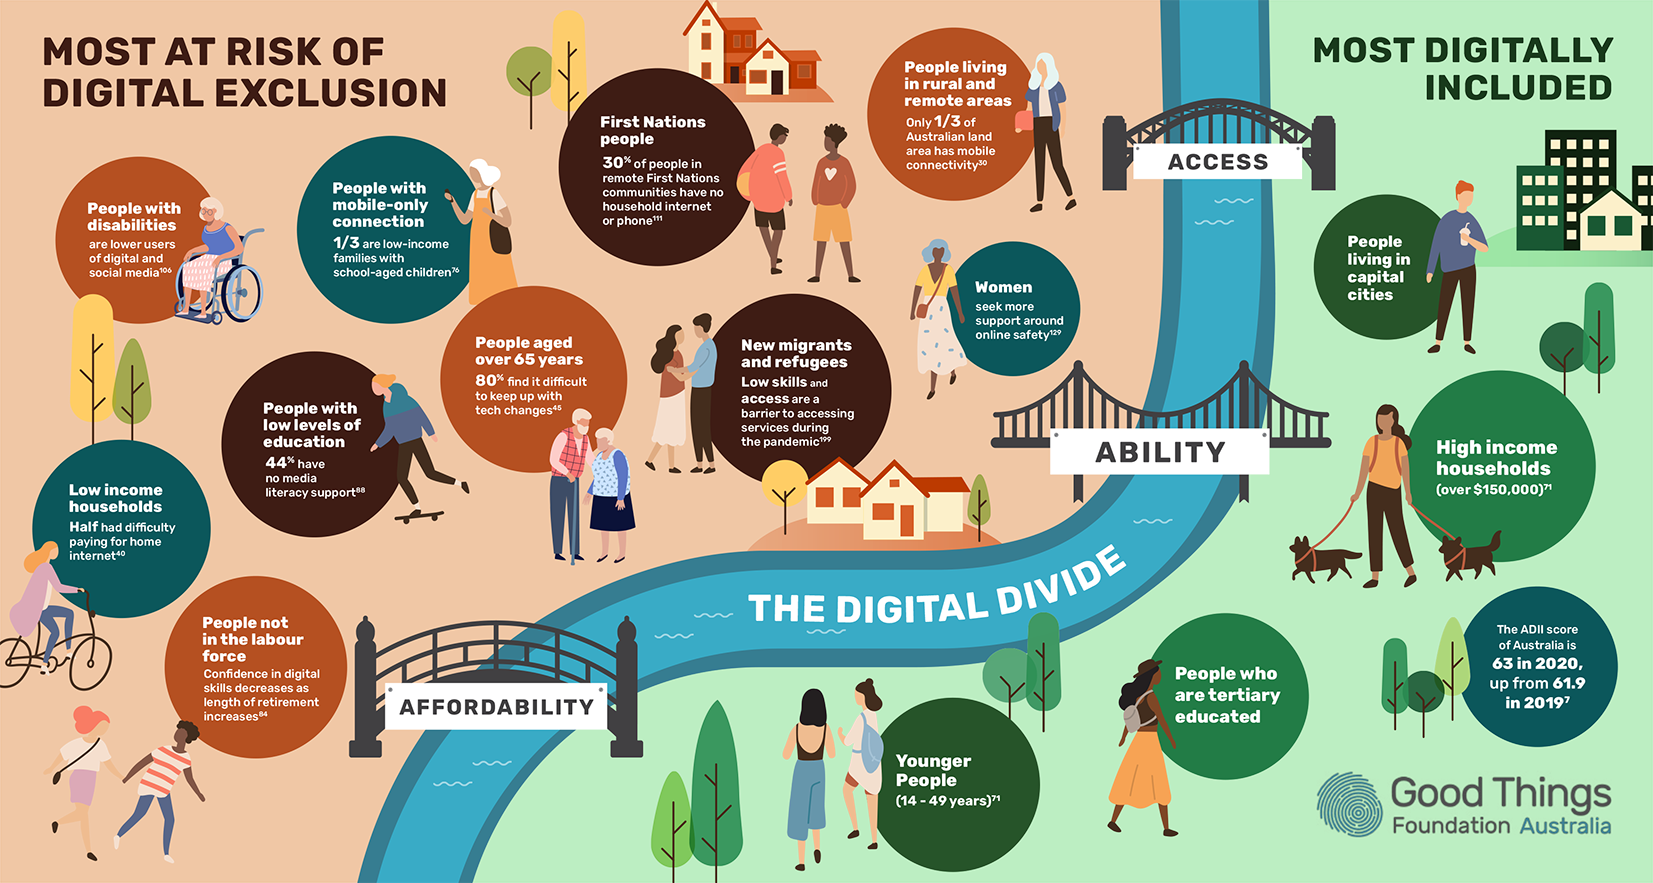 Infographic split in two sides, divided by a river labelled 'The Digital Divide'. The river has three bridges, labelled 'Access', 'Ability' and 'Affordability' respectively. On one side of the river, is the title heading 'Most at Risk of Digital Exclusion'. Underneath are several statistics, which are as follows. People with disabilities are lower users of digital social media. People with mobile-only connection: 1/3 are low-income families with school-aged children. First Nations people: 30% of people in remote First Nations communities have no household internet or phone. People living in rural and remote areas: Only 1/3 of Australian land area has mobile connectivity. Low income households: Half had difficulty paying for home internet. People with low levels of education: 44% have no media literacy support. People aged over 65 years: 80% find it difficult to keep up with tech changes. New migrants and refugees: Low skills and access are a barrier to accessing services during the pandemic. Women seek more support around online safety. People not in the labour force: Confidence in digital skills decreases as length of retirement increases. On the other side of the river is the title heading 'Most digitally included', with the following text listed: People living in capital cities, High income households (over $150,000), Younger people (14-49 years), People who are tertiary educated, The ADII score of Australia is 63 in 2020, up from 61.9 in 2019. Good Things Foundation Australia logo.